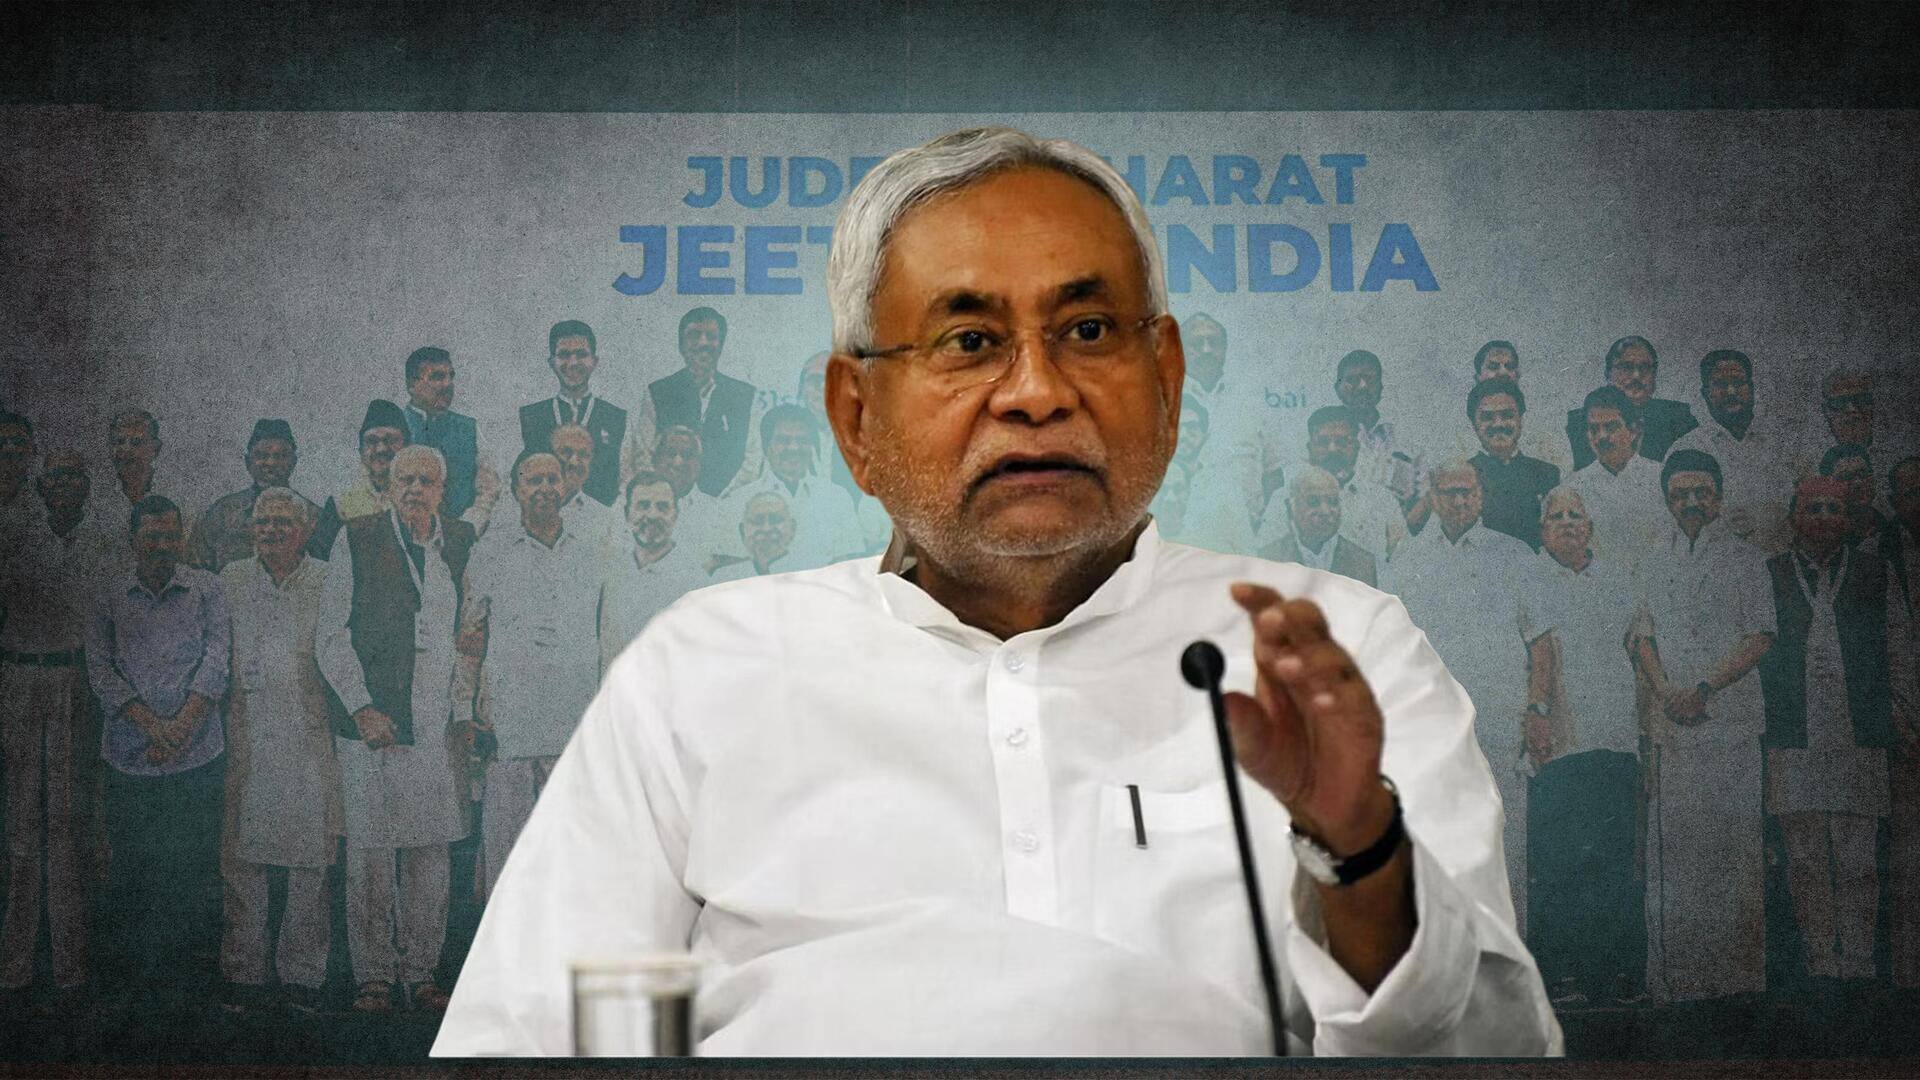 Congress more interested in assembly elections: Nitish on INDIA bloc